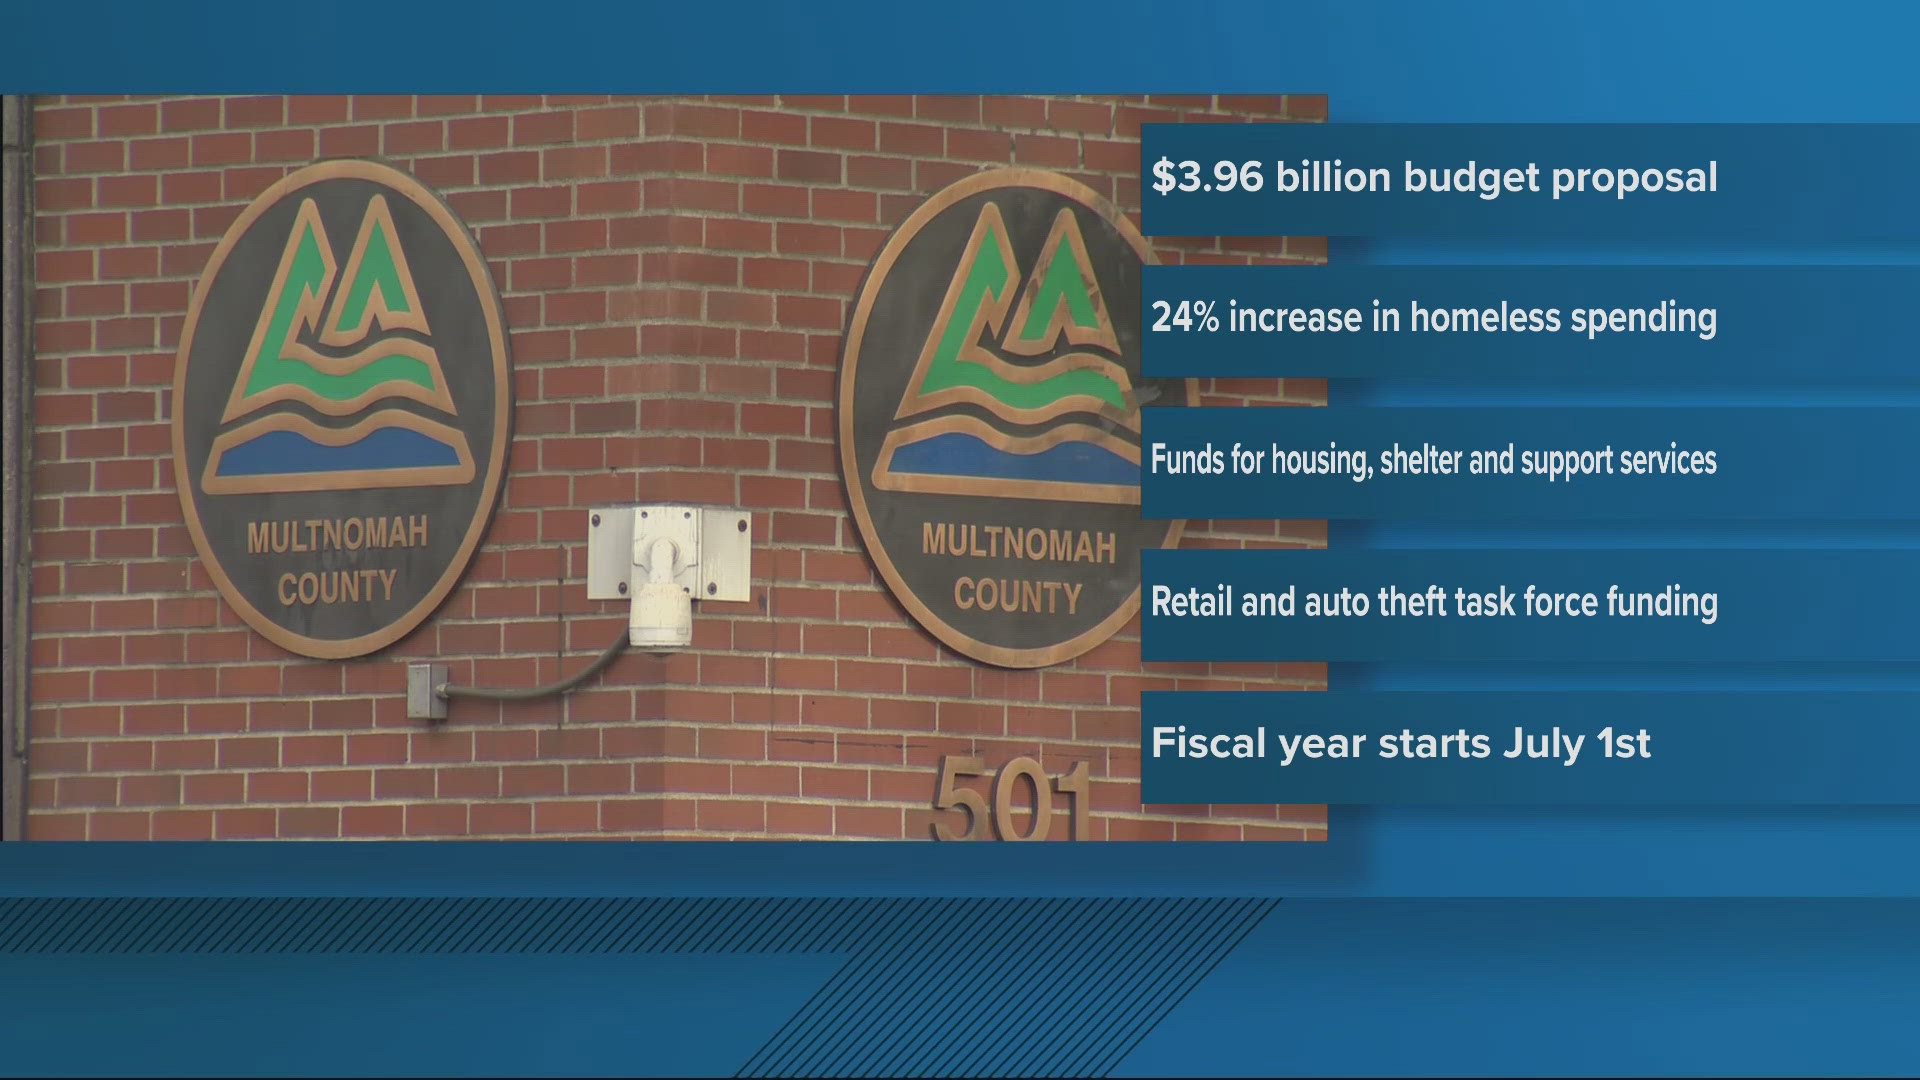 Multnomah County’s nearly $4 billion budget proposal includes a significant increase on ways to help the homeless crisis from shelter upgrades to support services.